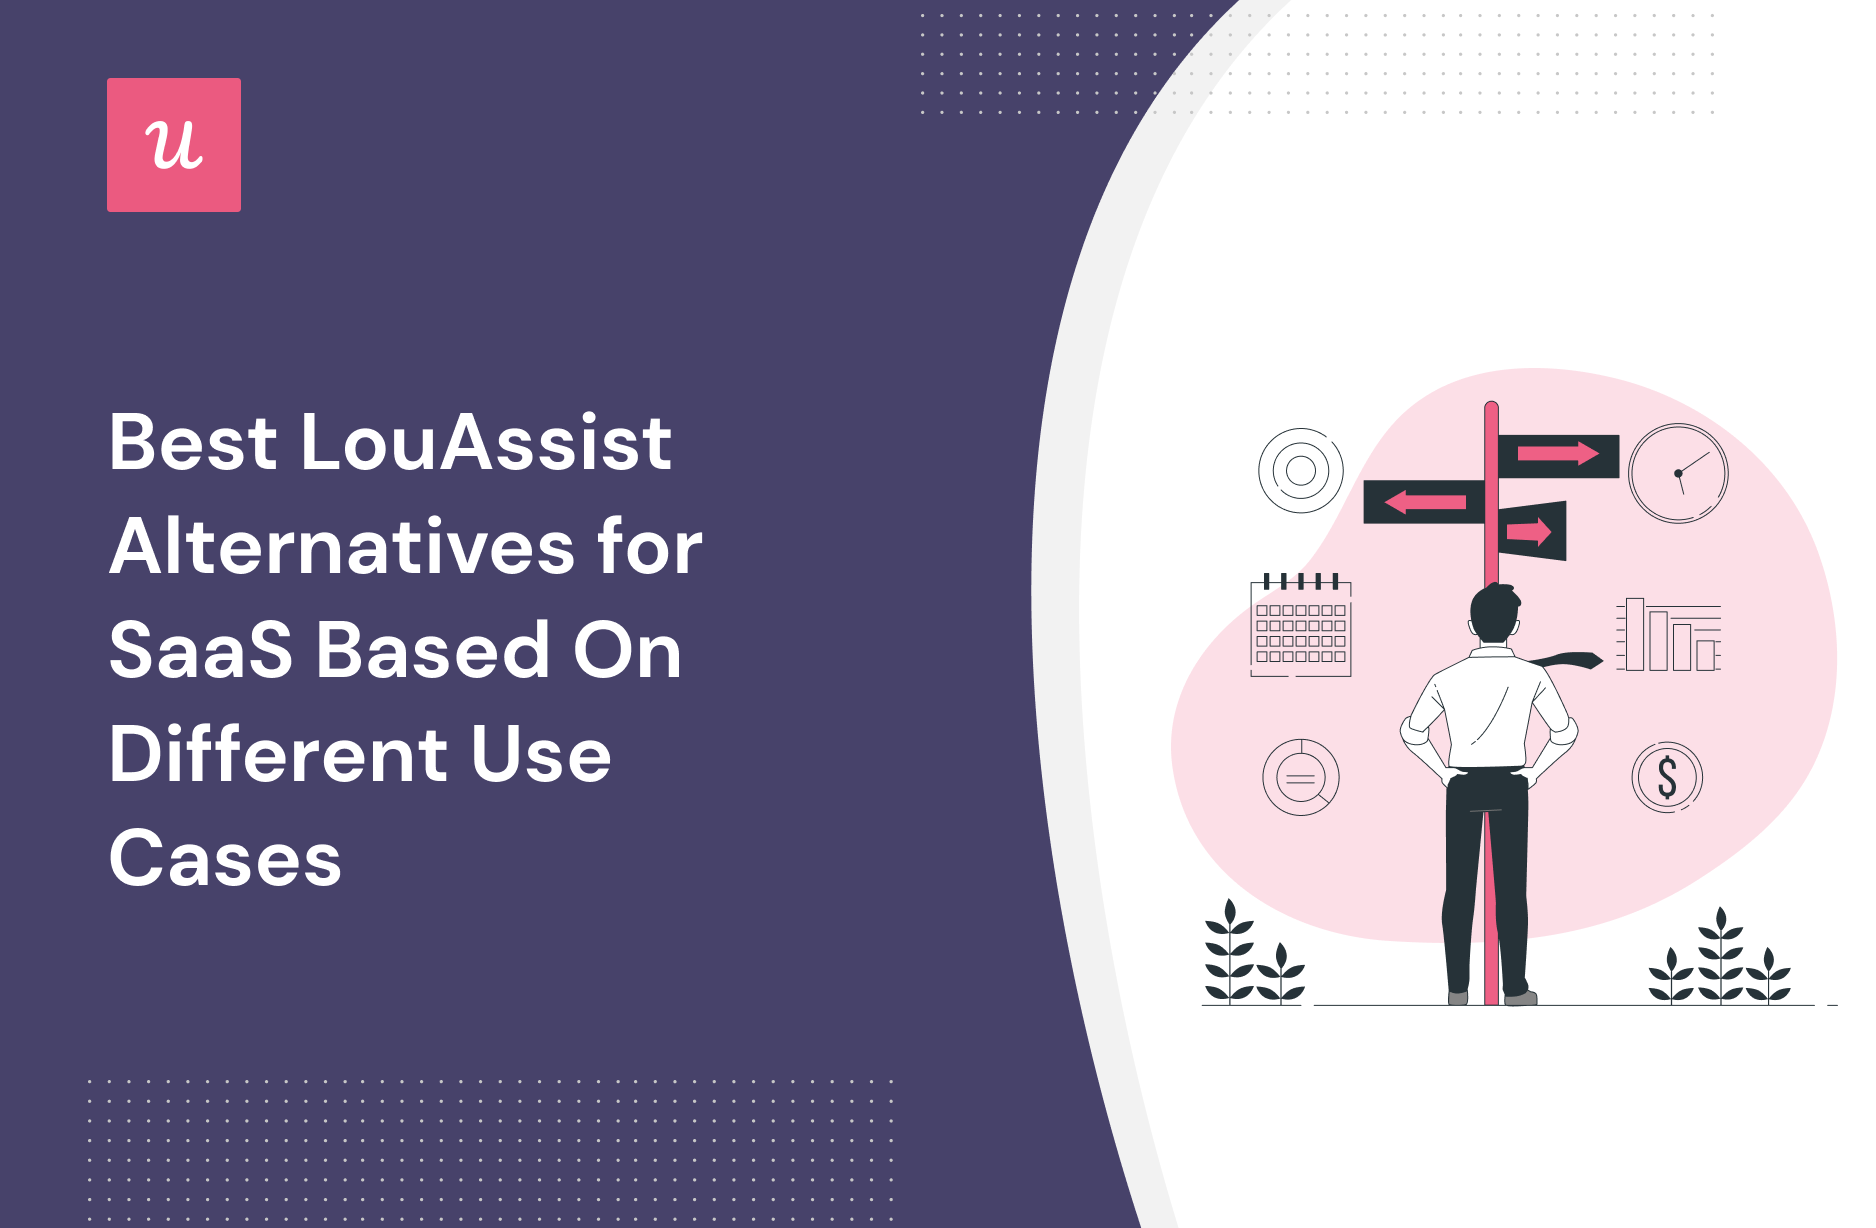 Best LouAssist Alternatives for SaaS Based On Different Use Cases